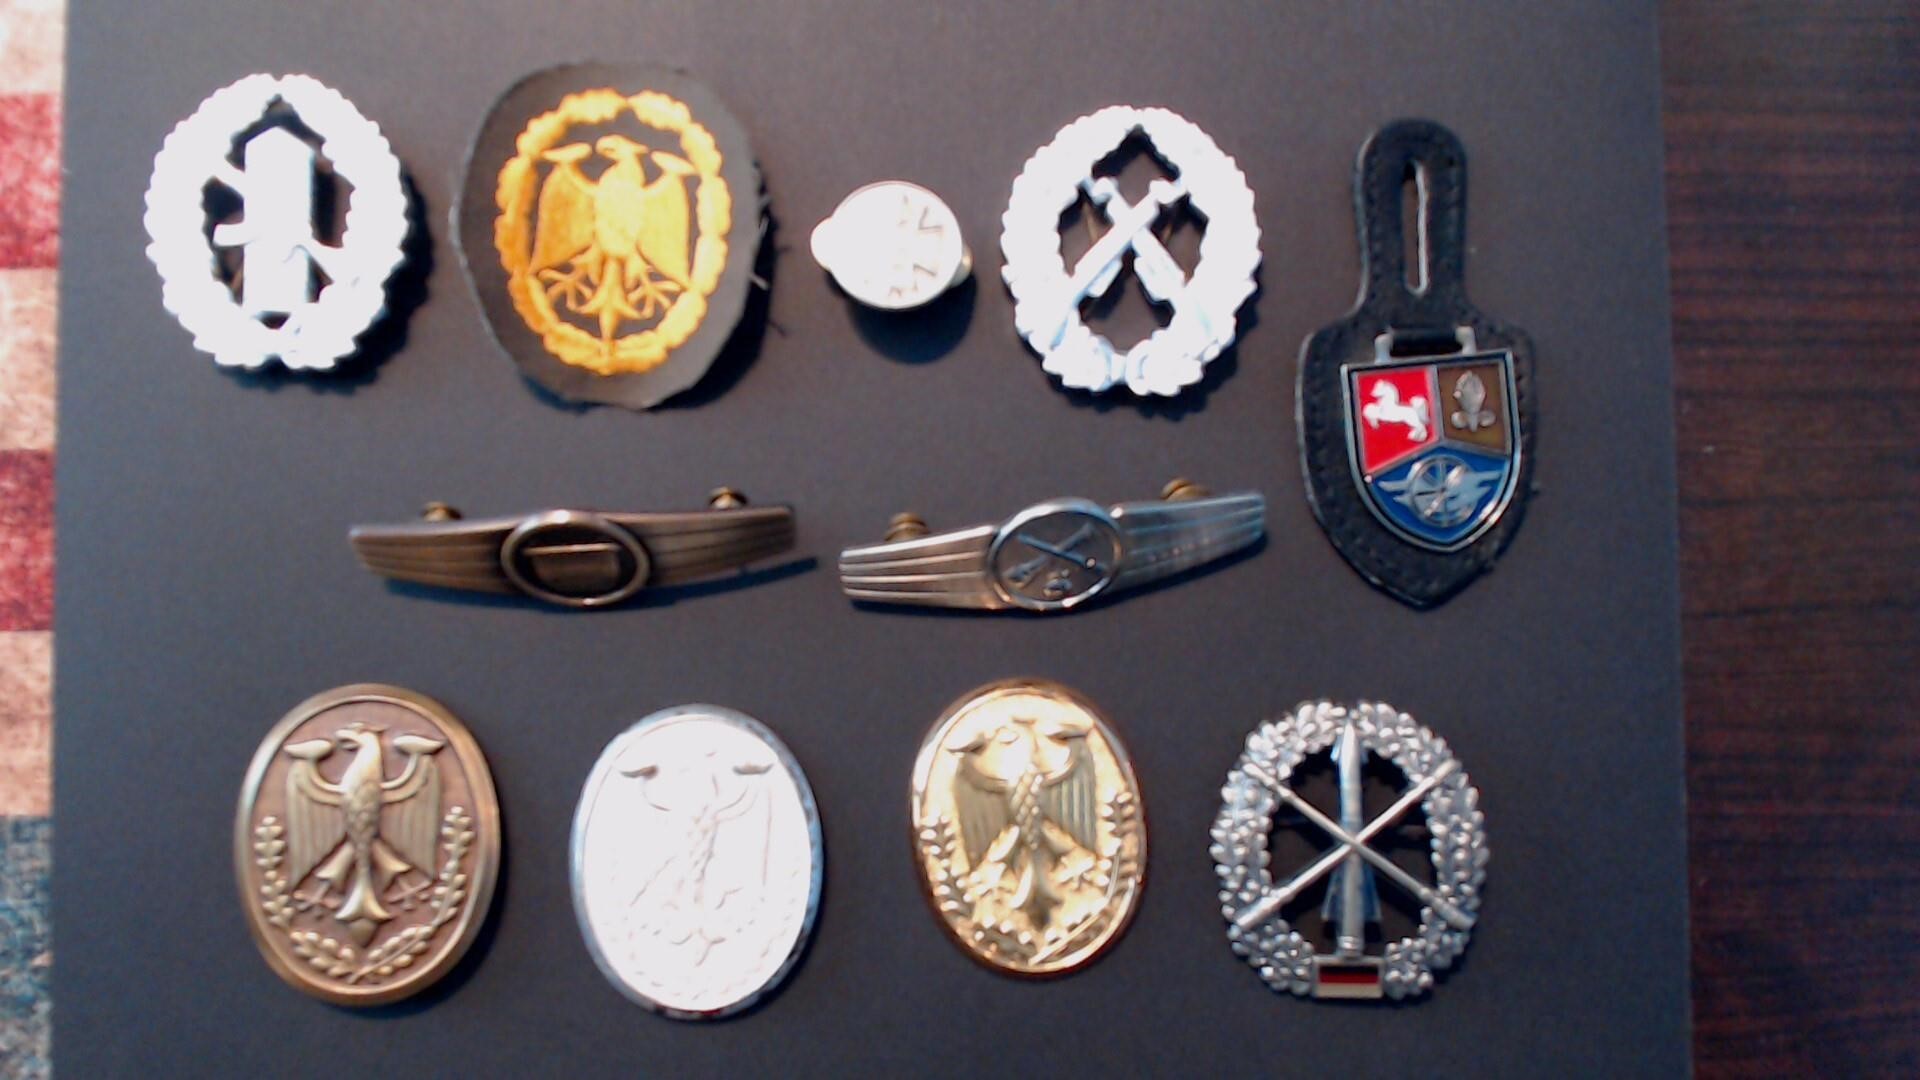 Lot of Foreign Army Badges, German and Italian